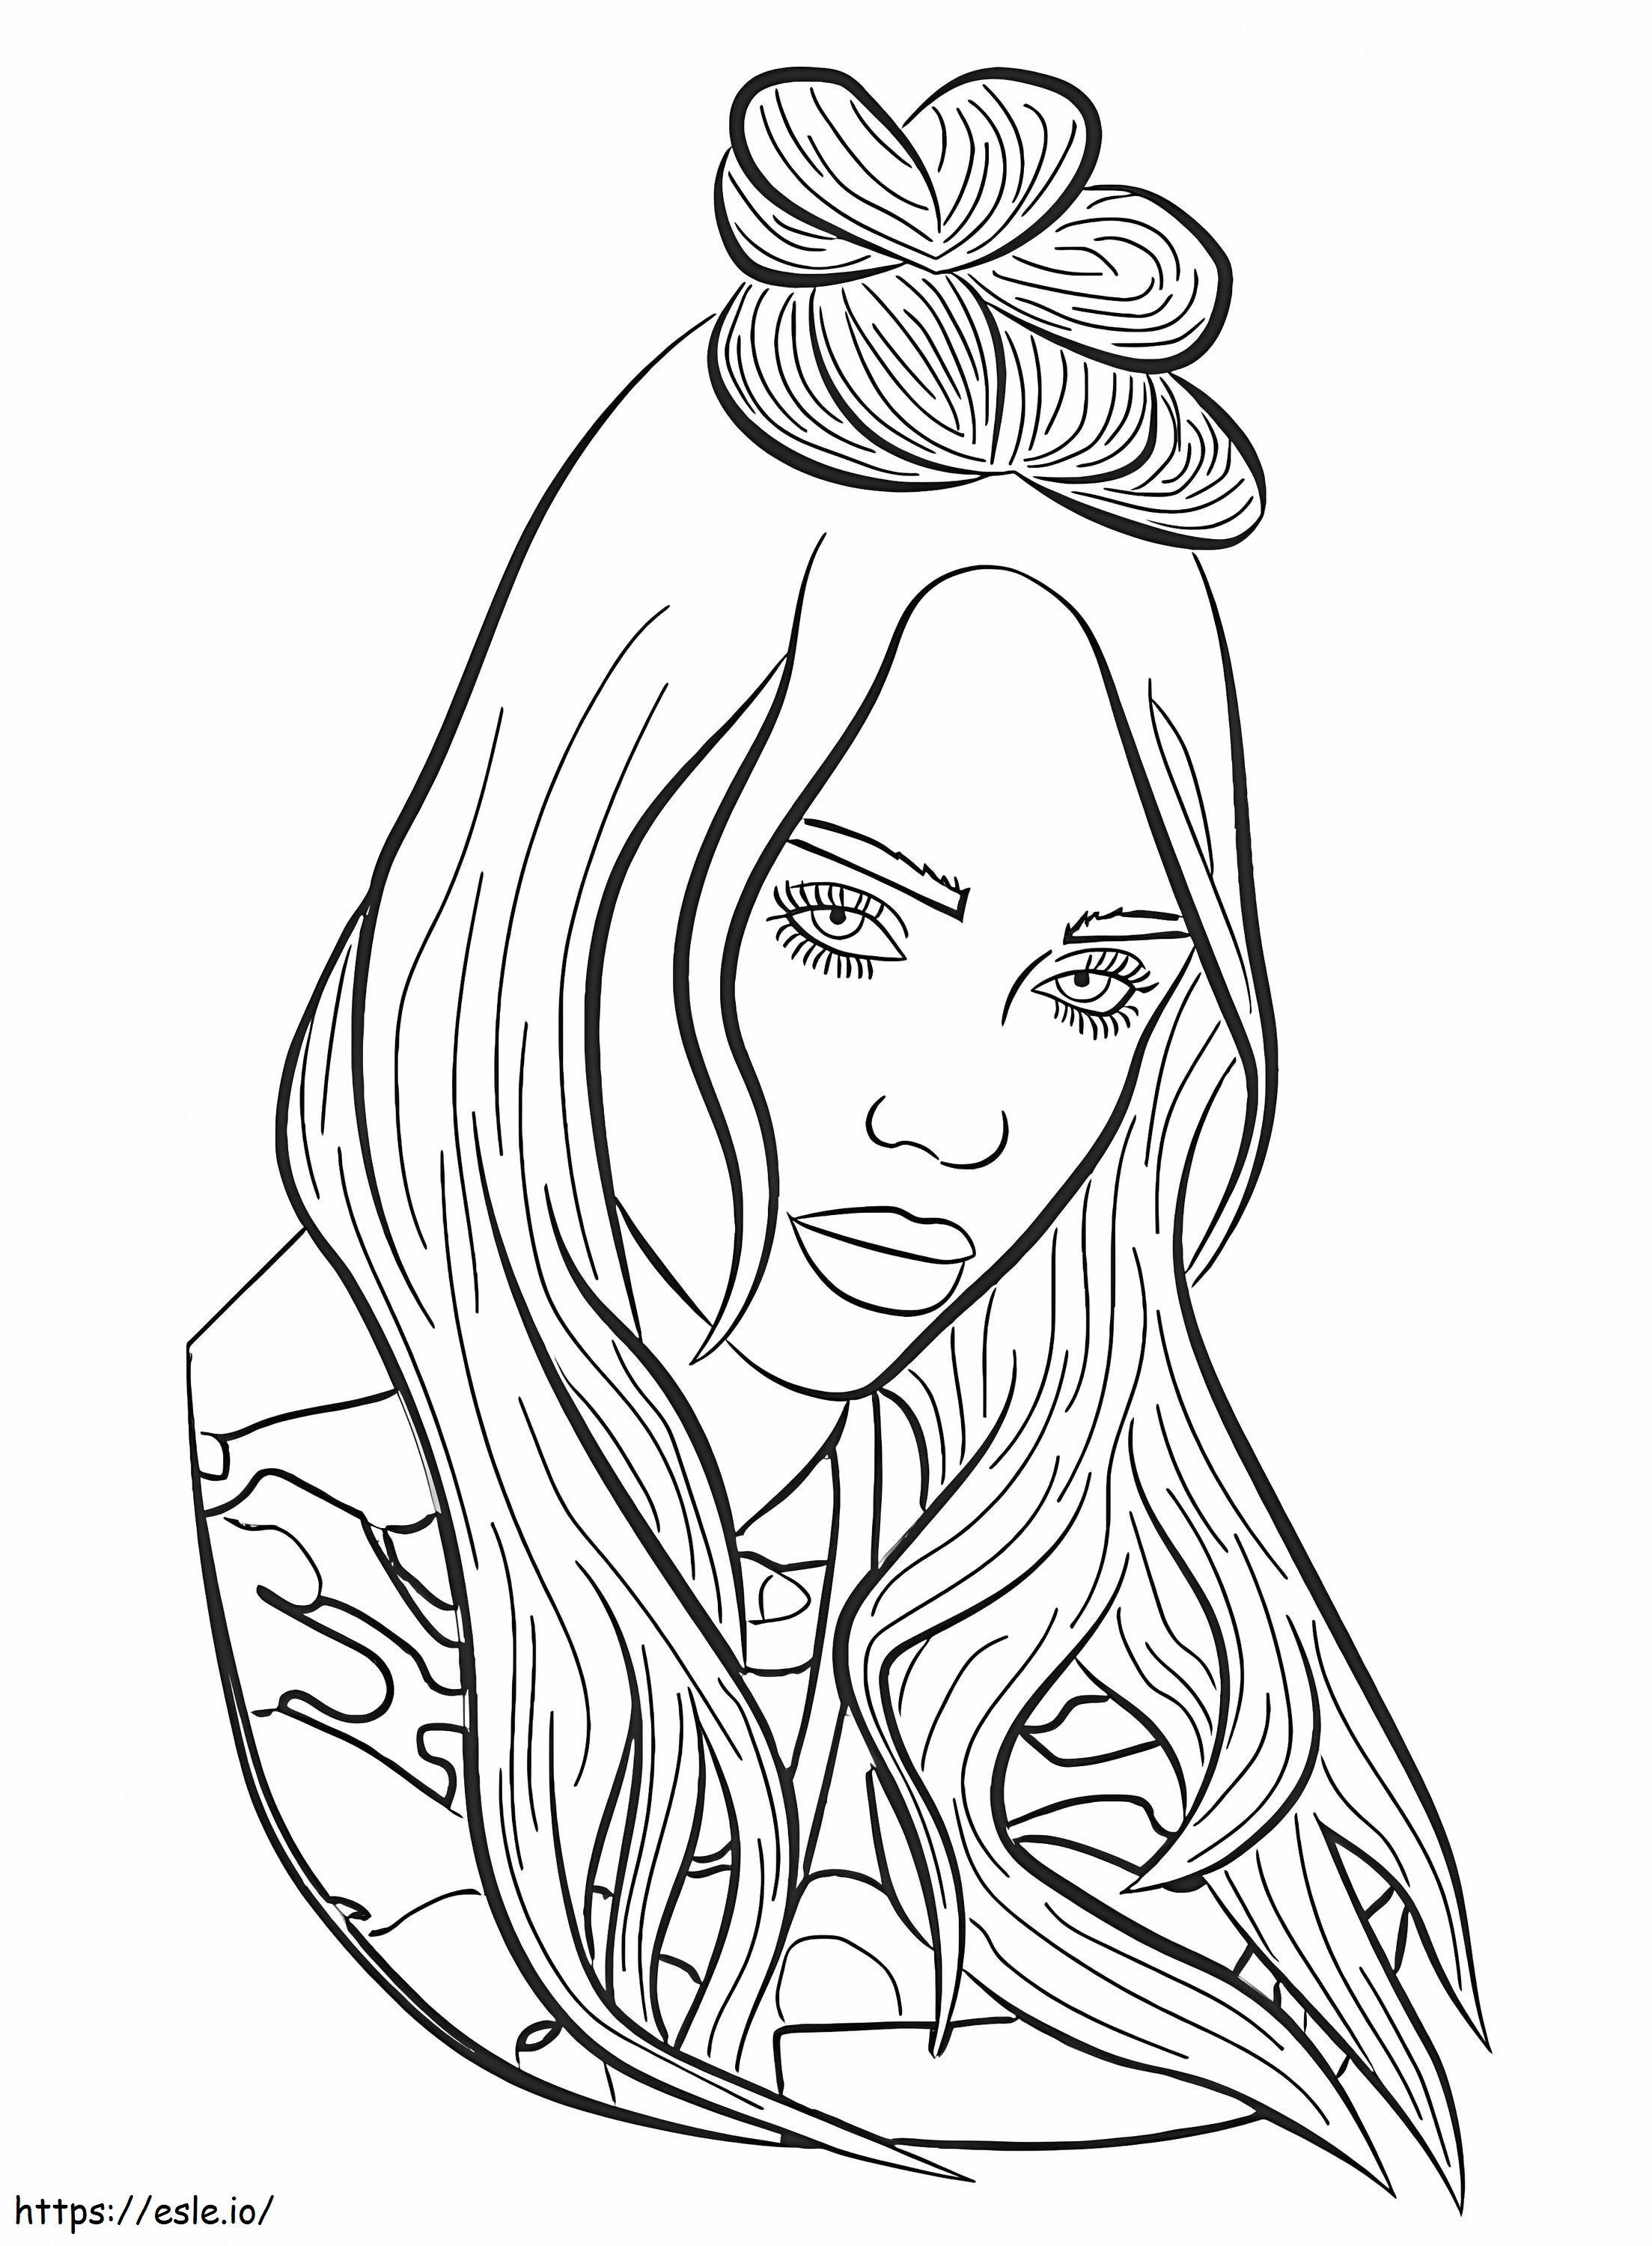 Billie Eilish Looks Cool coloring page